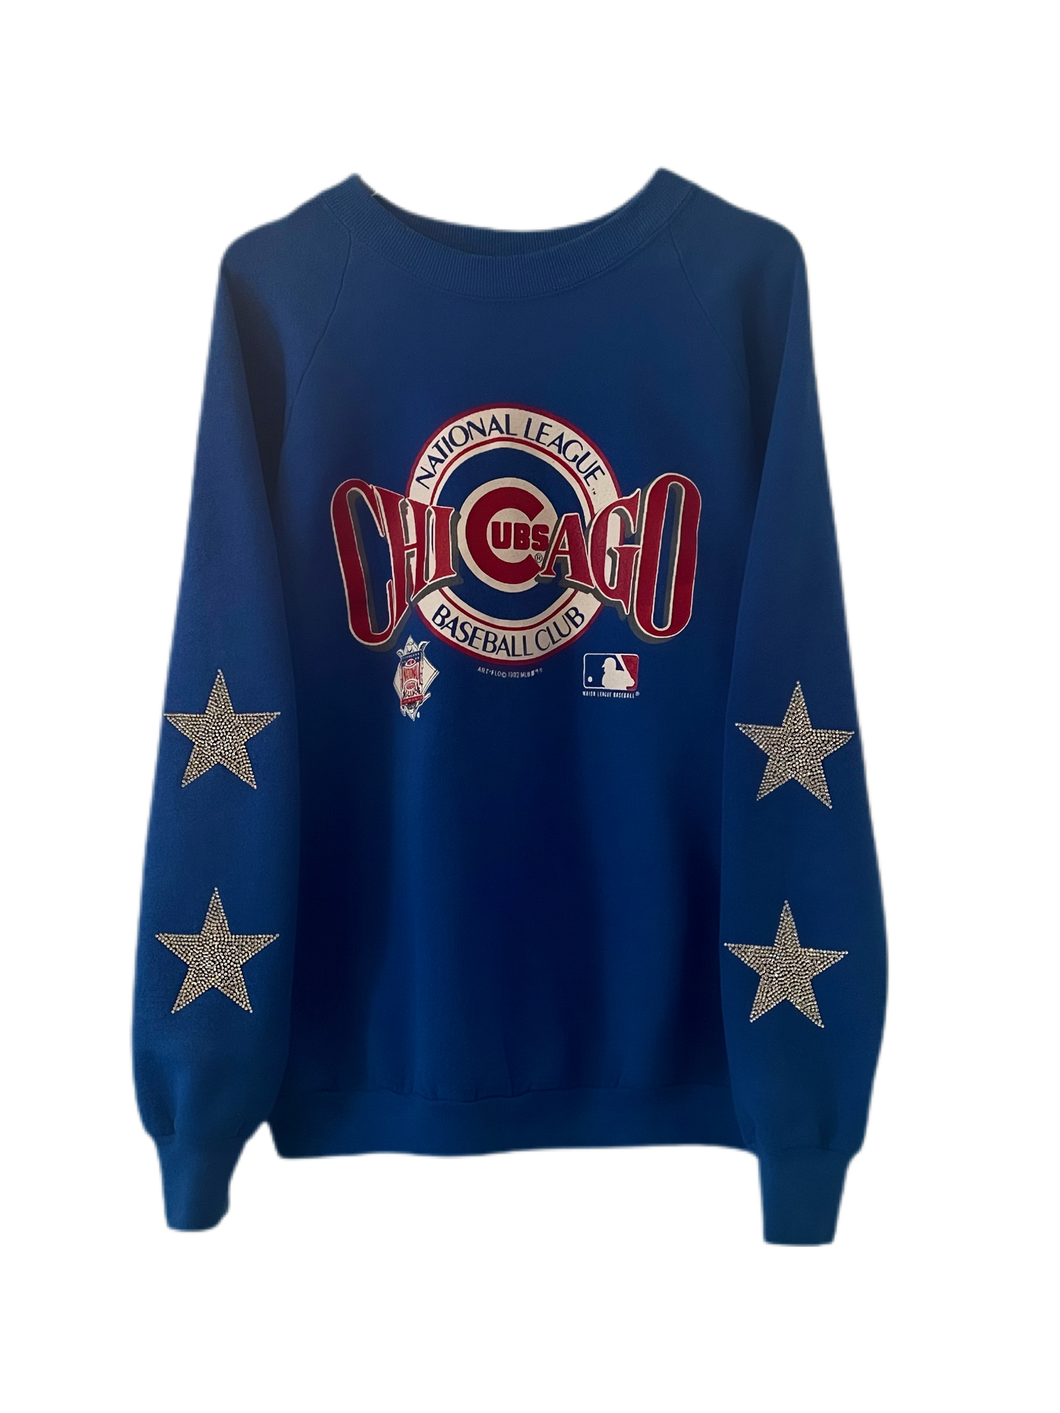 ShopCrystalRags Chicago Cubs, MLB One of A Kind Vintage Sweatshirt with Crystal Star Design